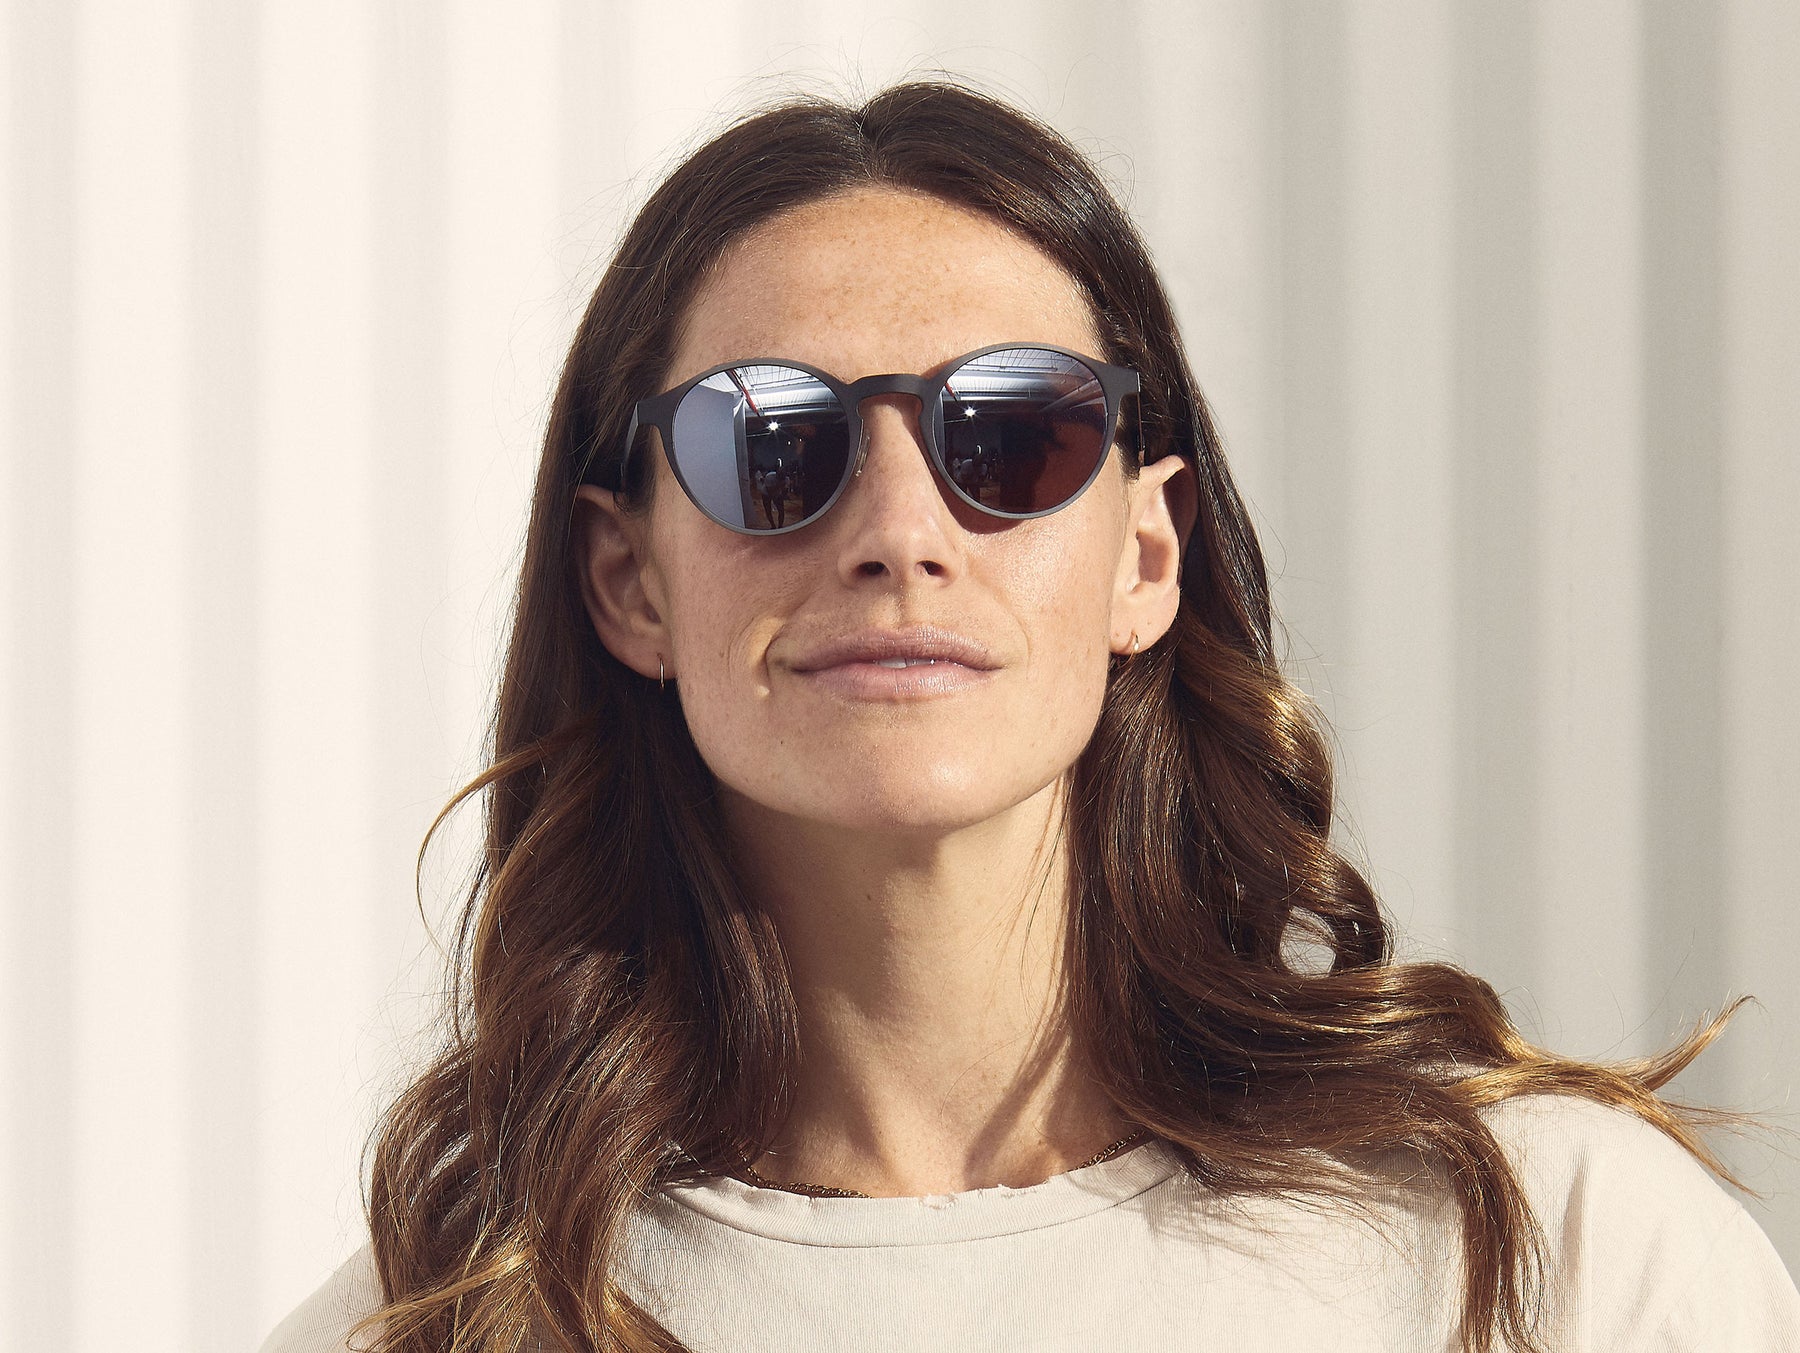 Model is wearing The MILTZEN-T SUN in Charcoal/Wine in size 49 with Silver Flash Mirror Coated Lenses